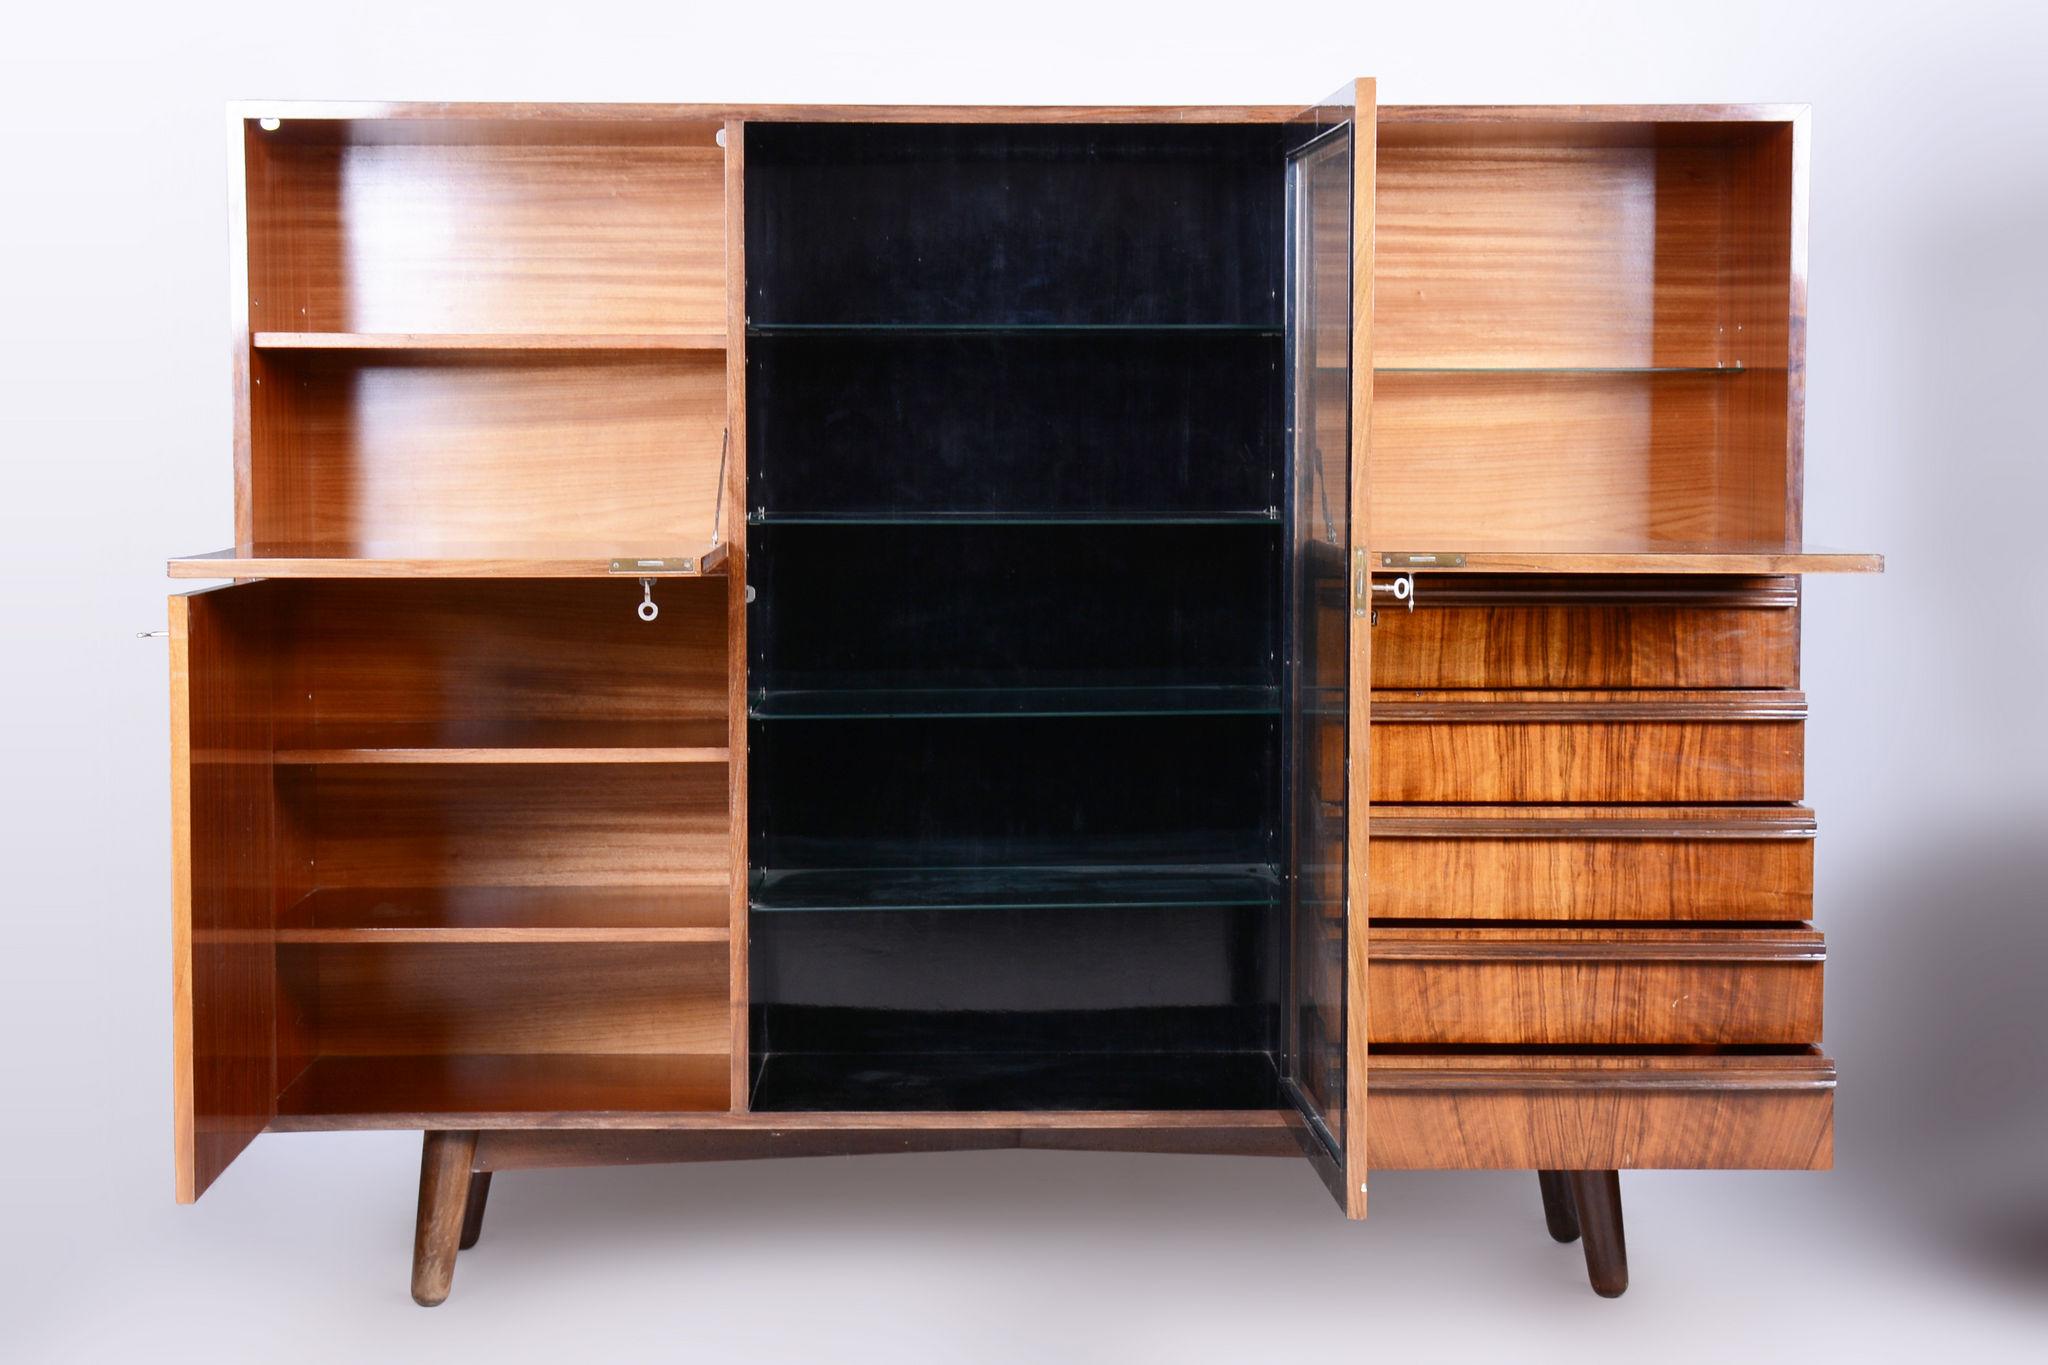 Restored Art Deco Bookcase Sideboard, Walnut, Revived Polish, Czech, 1920s In Good Condition For Sale In Horomerice, CZ